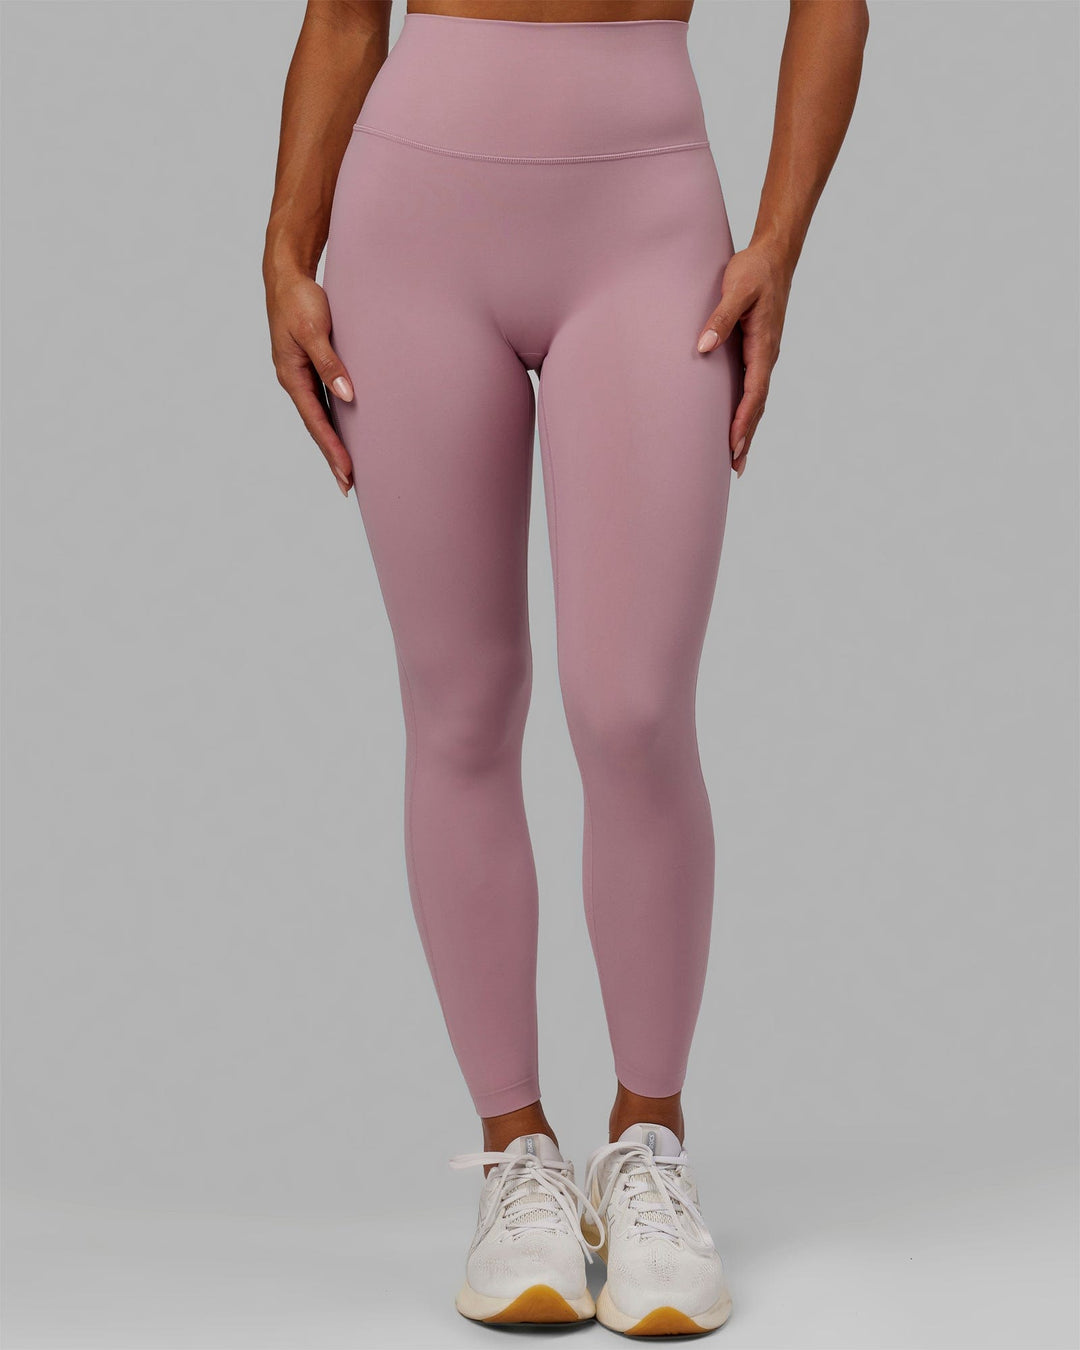 Woman wearing Elixir Full Length Tights - Cosmetic Pink